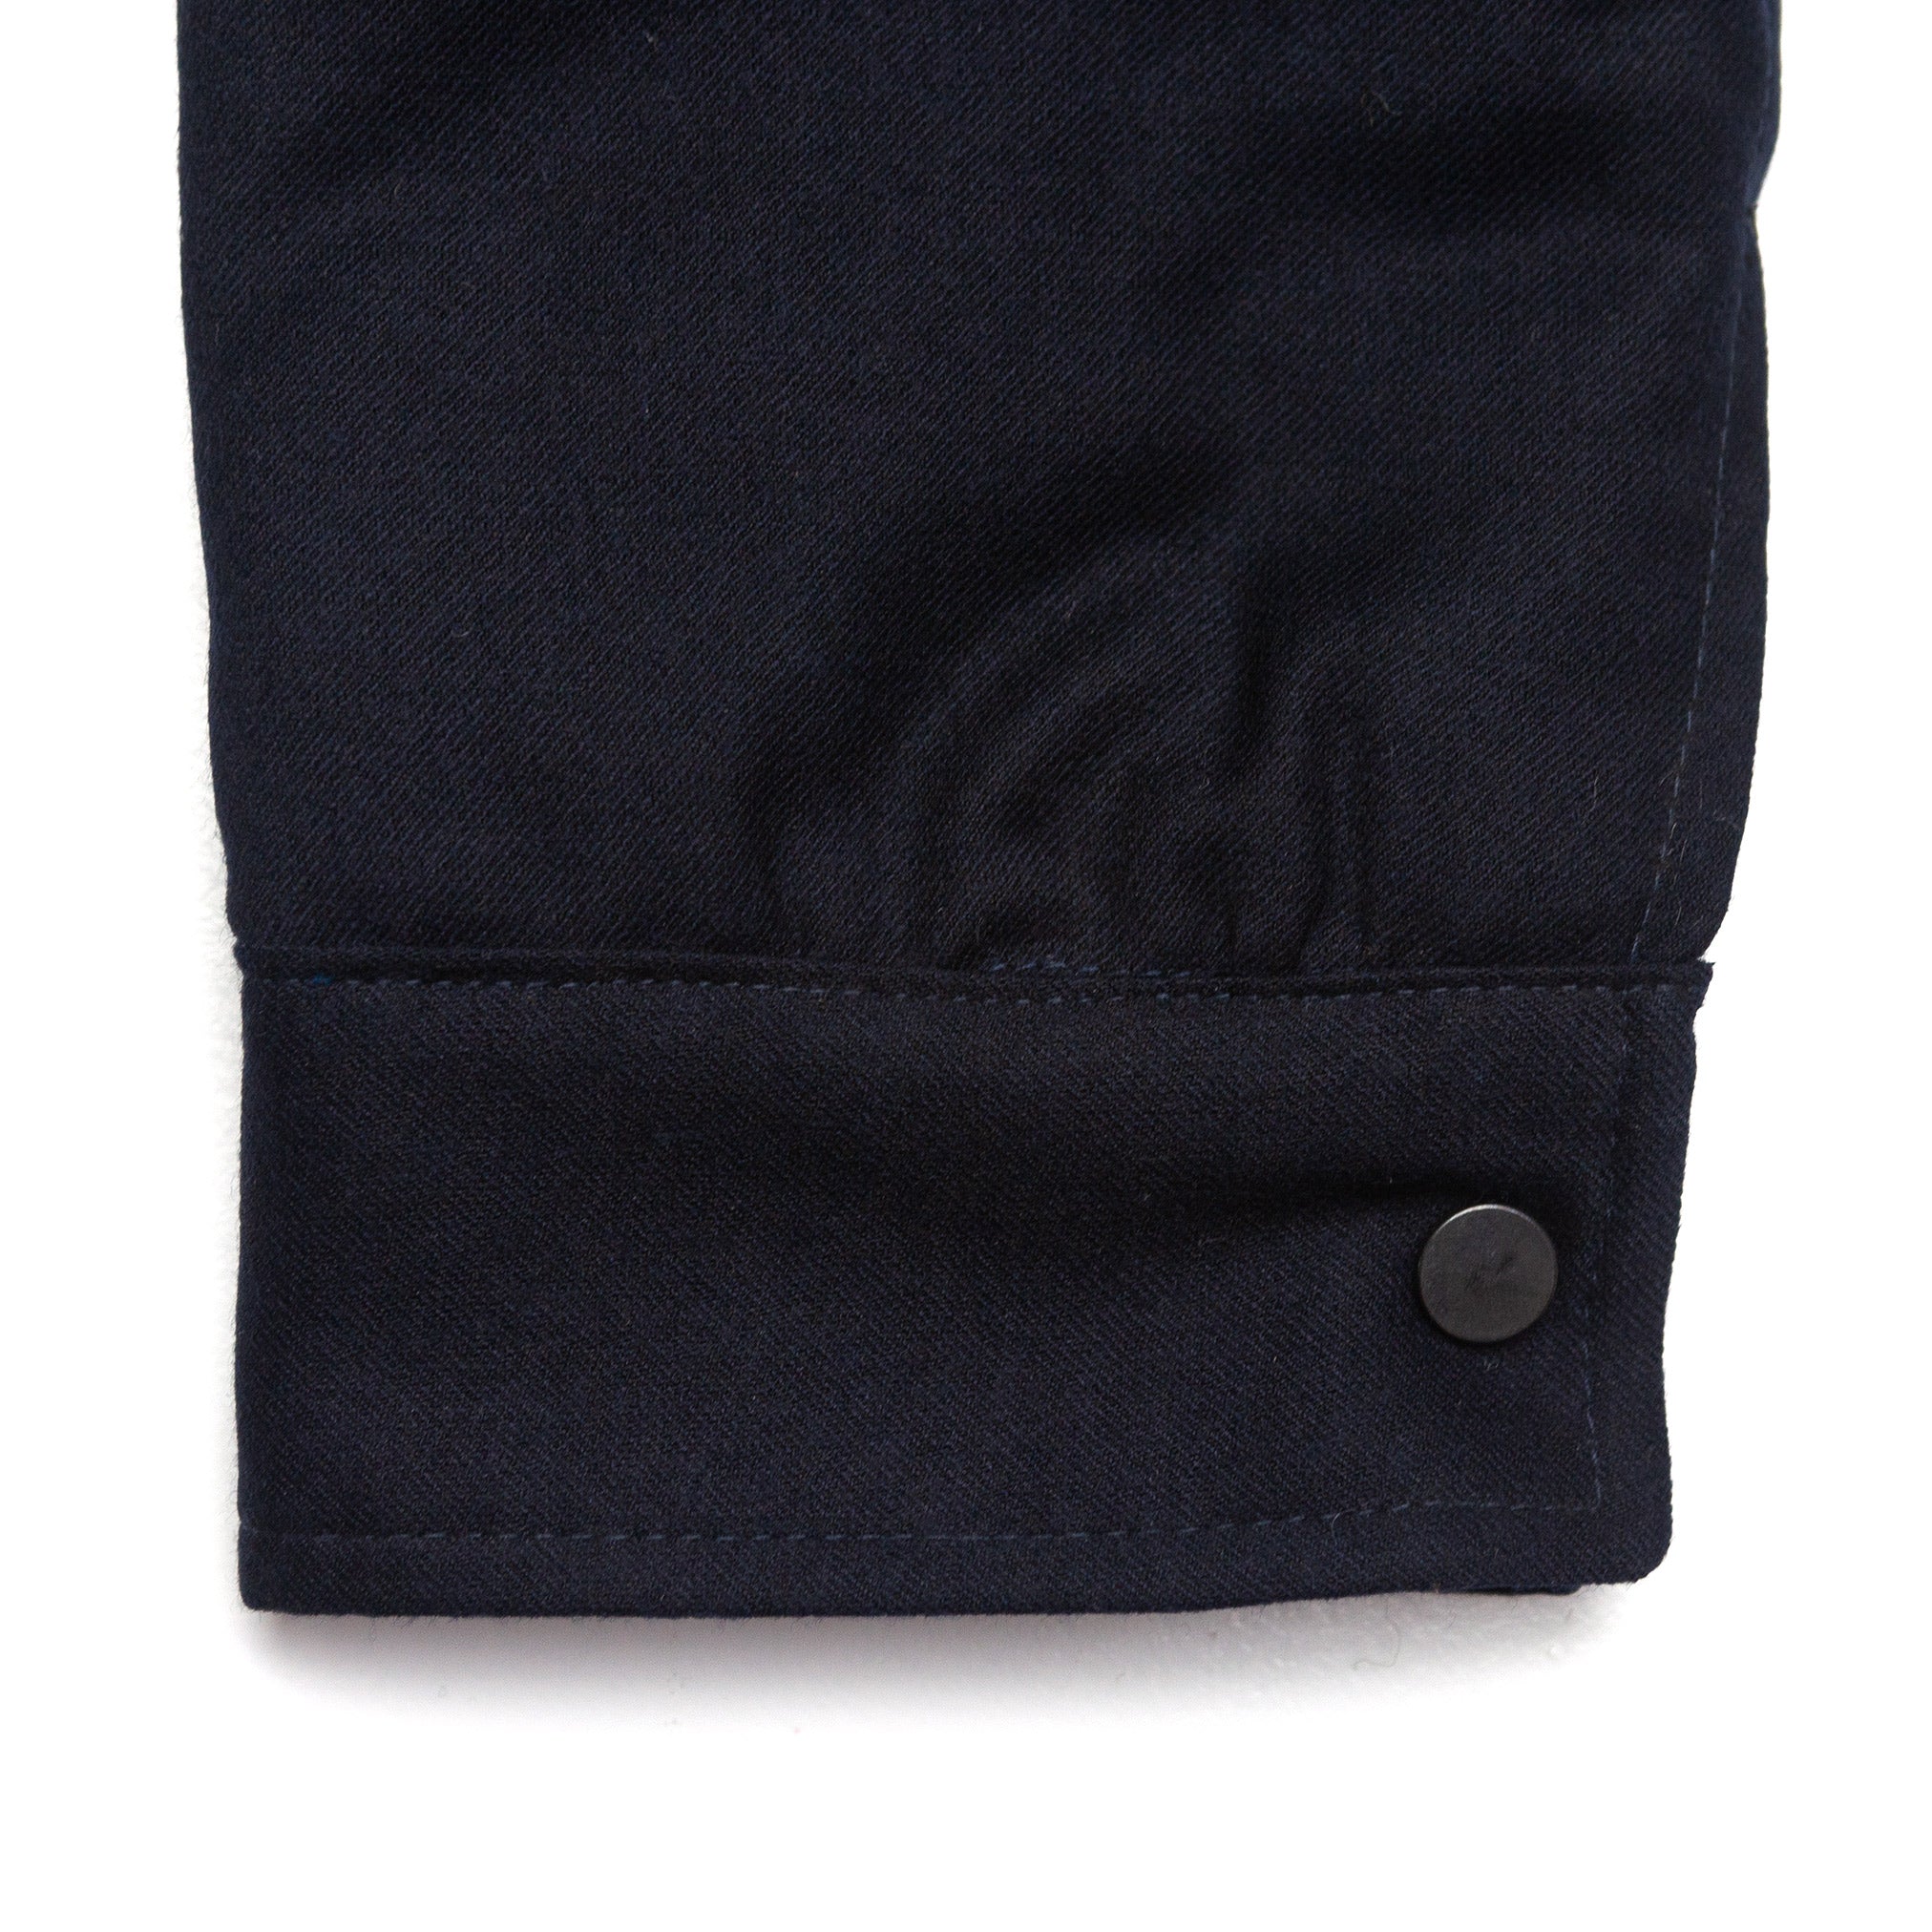 Lined Tyrol Shirt Jacket in Navy Wool